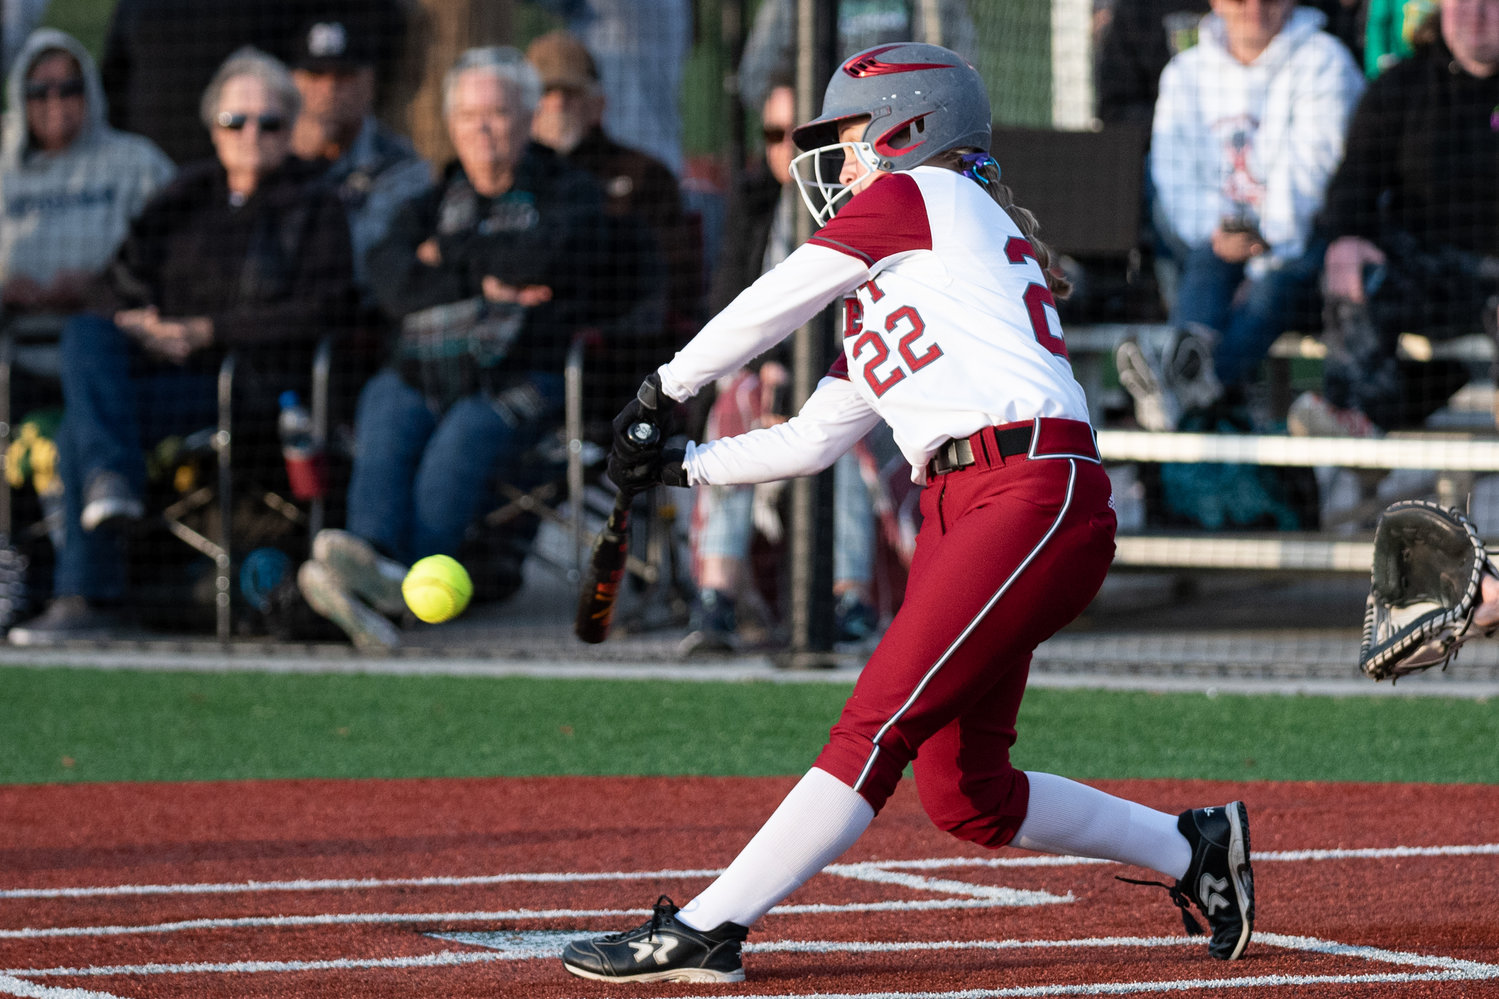 W.F. West freshman Avalon Myers hits the game-winning base knock in the seventh inning against Tumwater in the 2A District 4 championship game at Rec Park May 20.